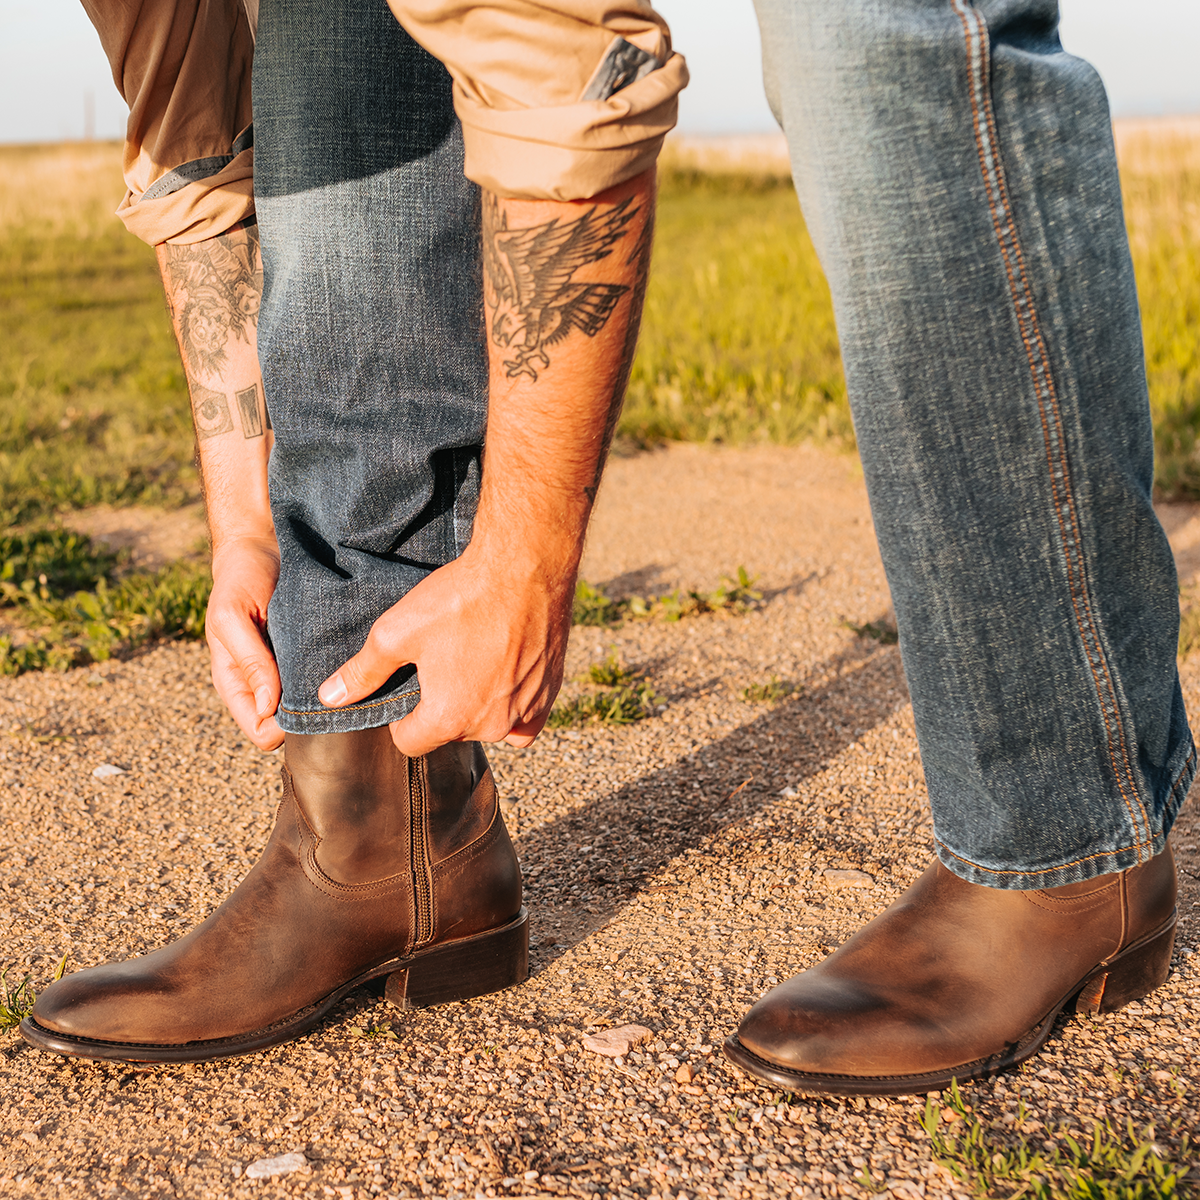 FREEBIRD men's Tifton brown single exterior pull strap, squared toe, and inside zip closure low heeled mid calf boot lifestyle